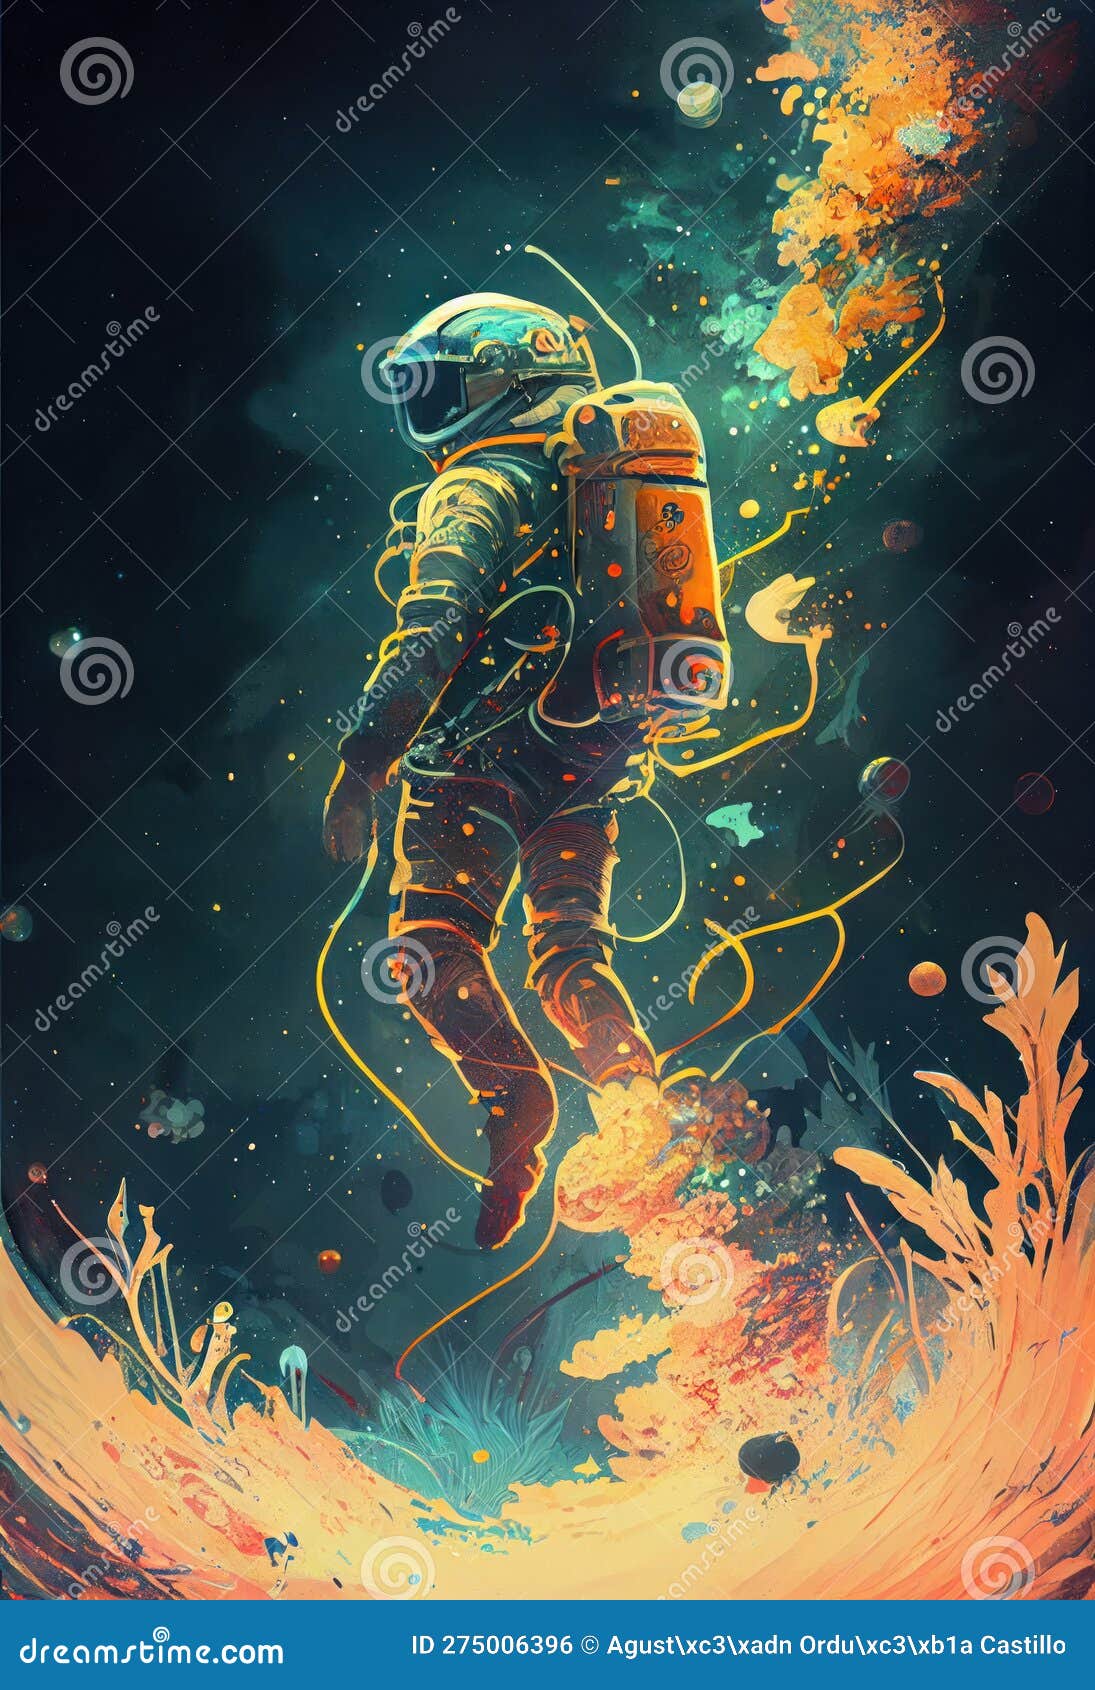 a poster of an astronaut floating in space.